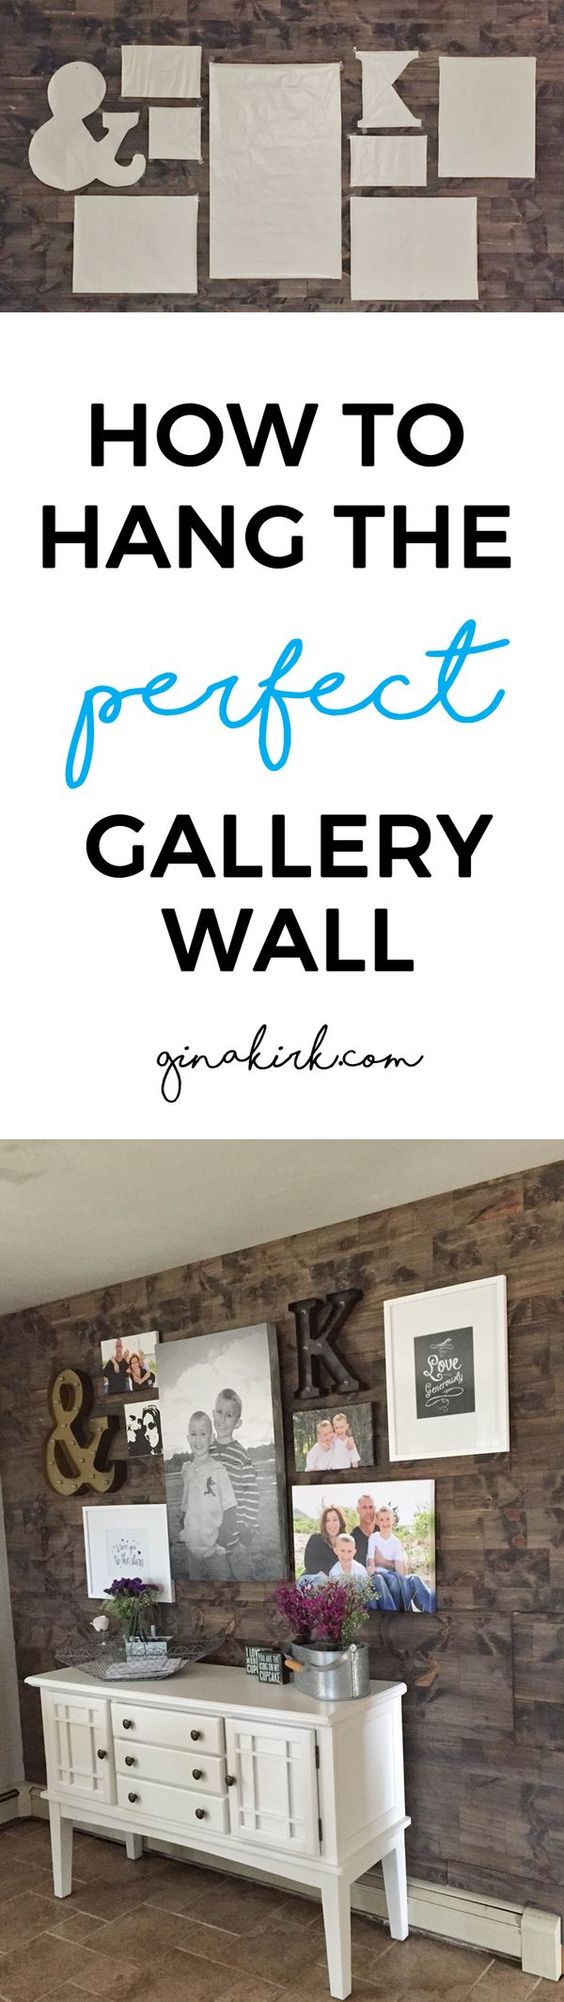 How to hang the perfect gallery wall - home decor, DIY gallery wall - my secret! Fixer upper inspired kitchen gallery wall!